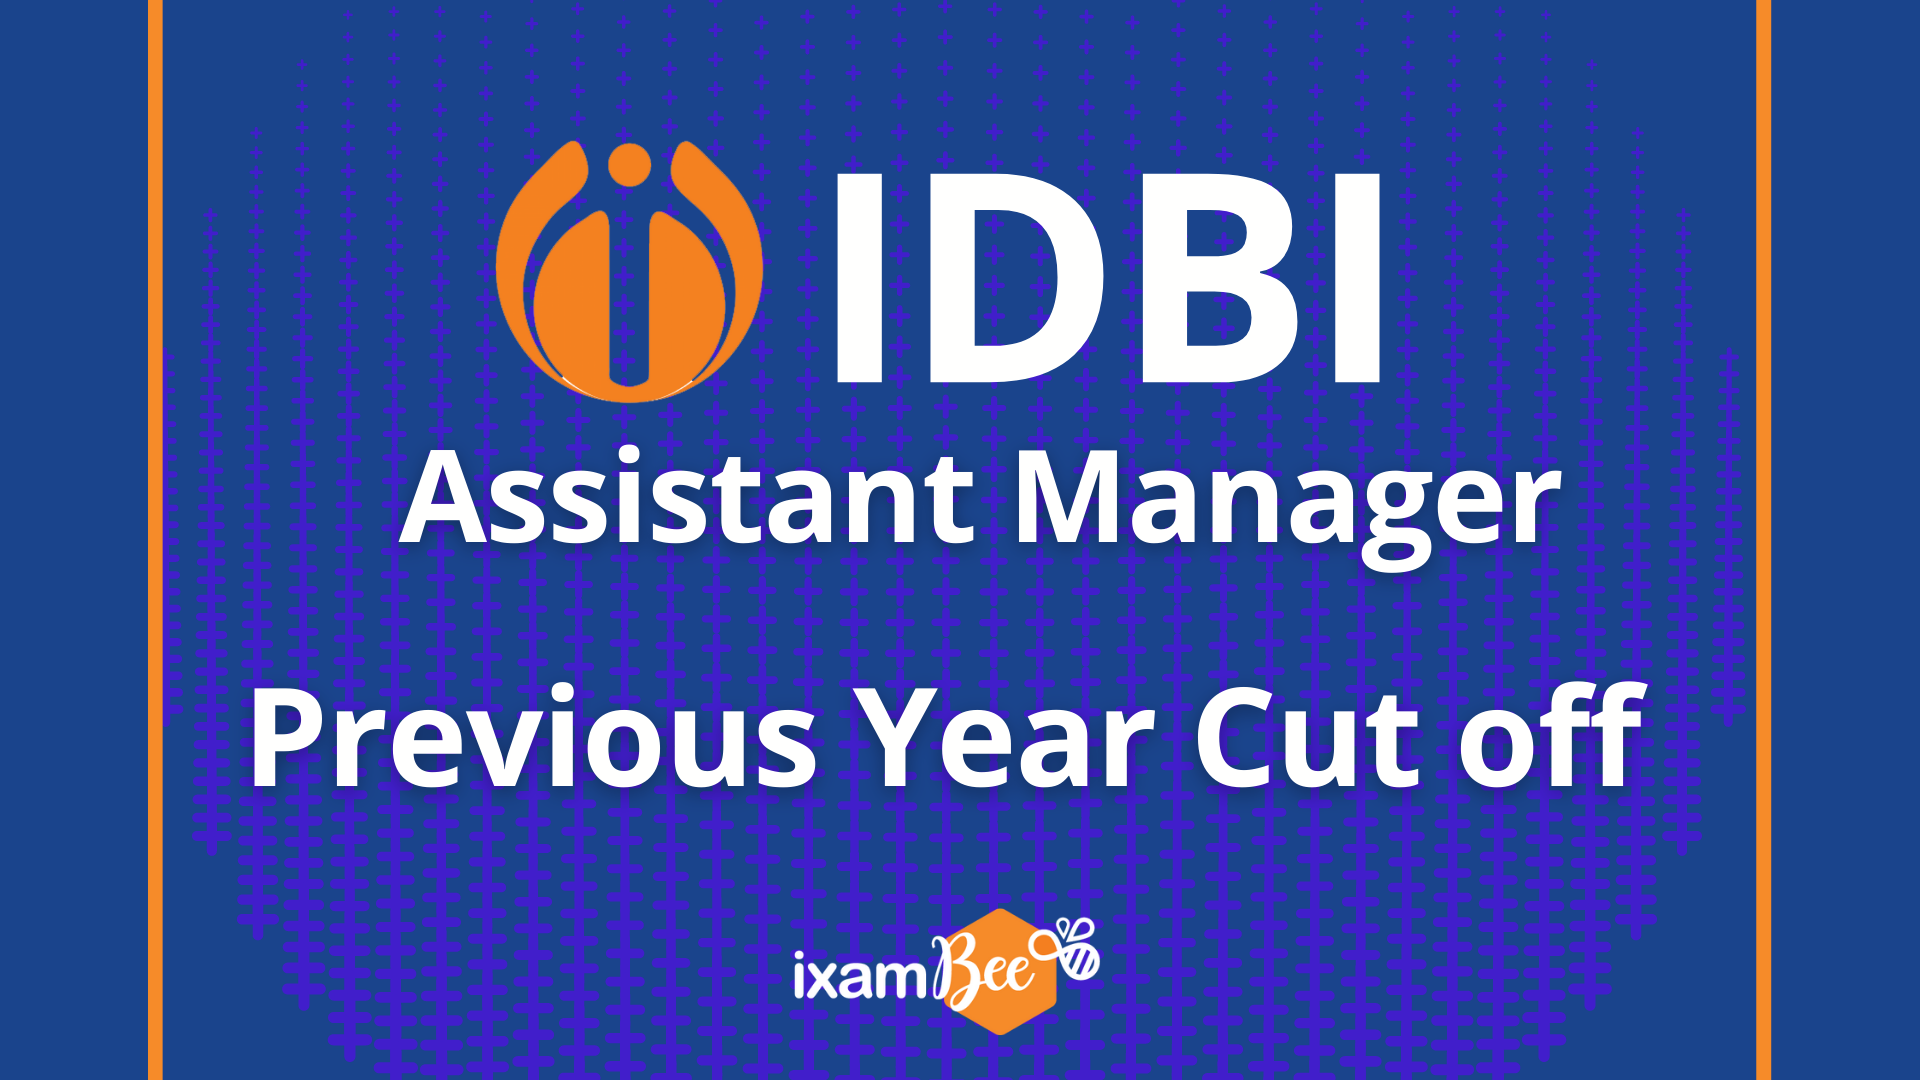 IDBI Assistant Manager Previous Year Cut Off